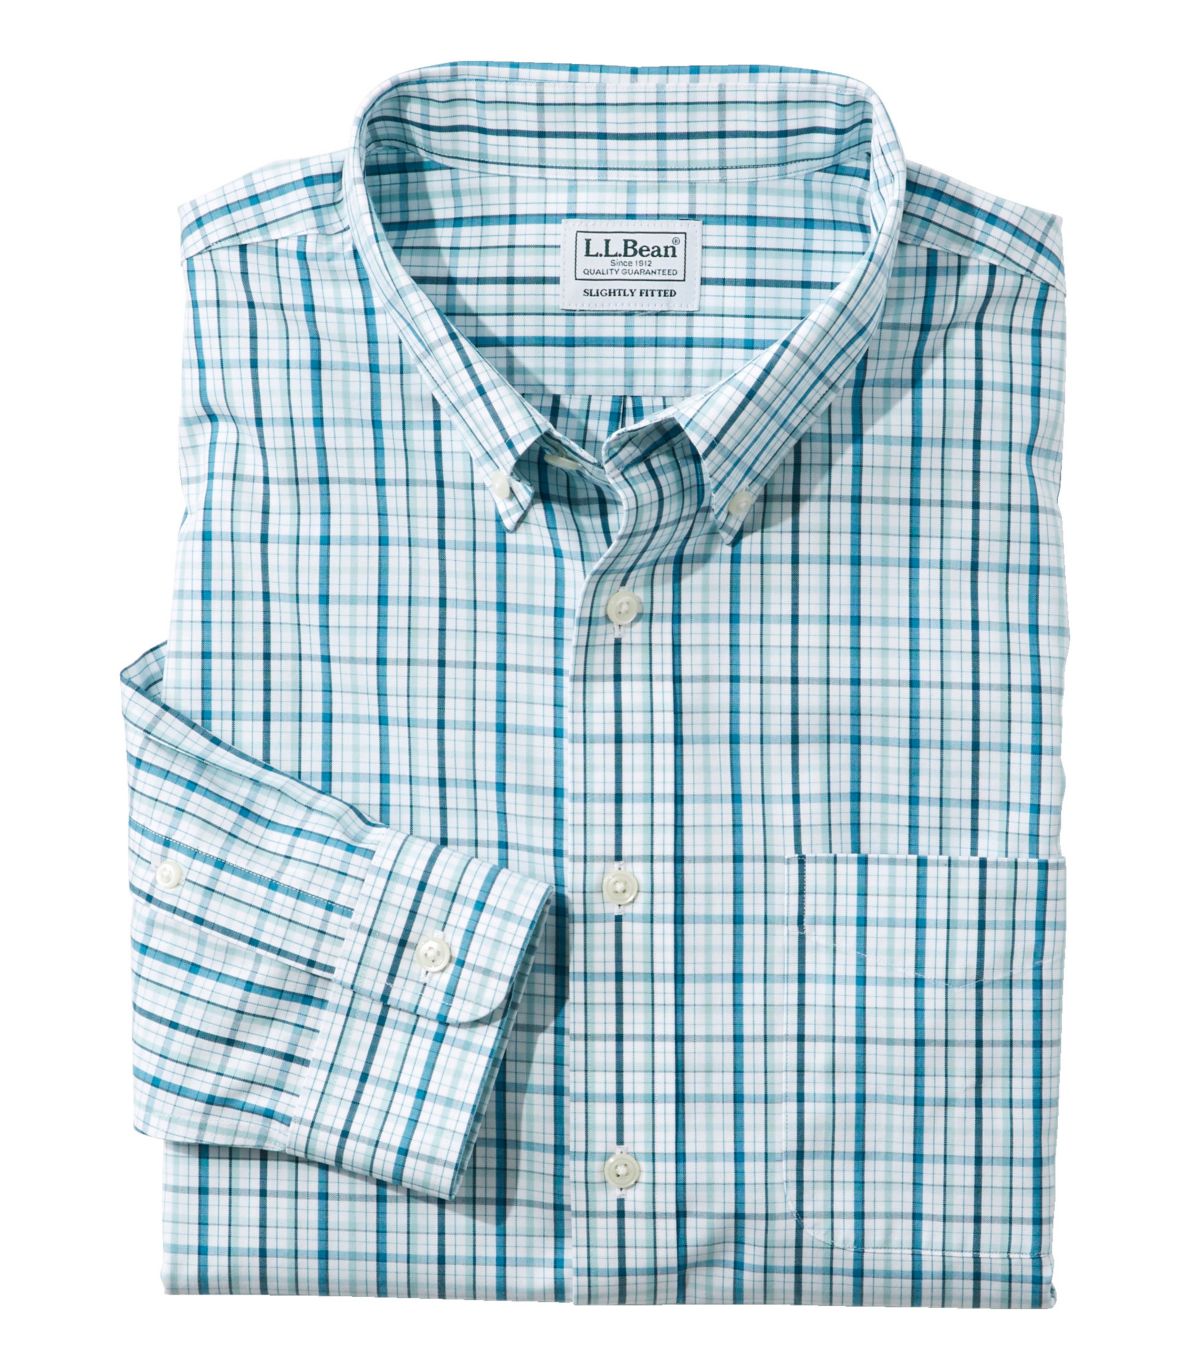 Men's Wrinkle-Free Pinpoint Oxford Shirt, Slightly Fitted Tattersall